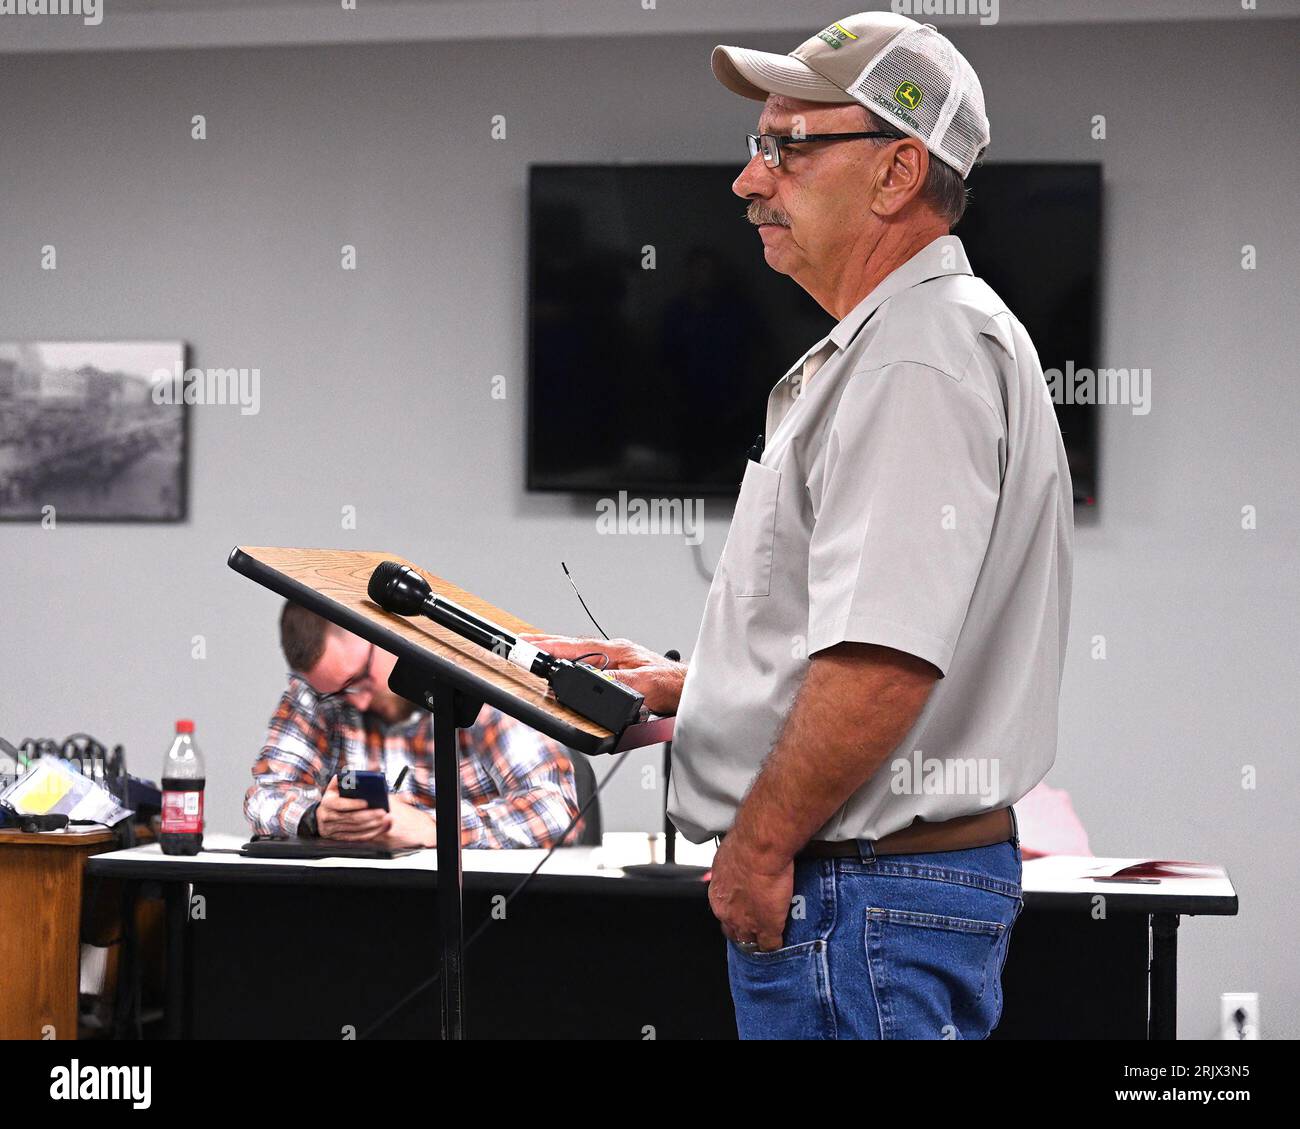 MARION, KANSAS - AUGUST 21, 2023 Darwin Markley a member of the Marion planning and zoning board tells the city council  that they should fire Marion Police Chief Gideon Cody “As far as Chief Cody goes, he can take his high horse he brought into this community and giddy up on out of town” Stock Photo